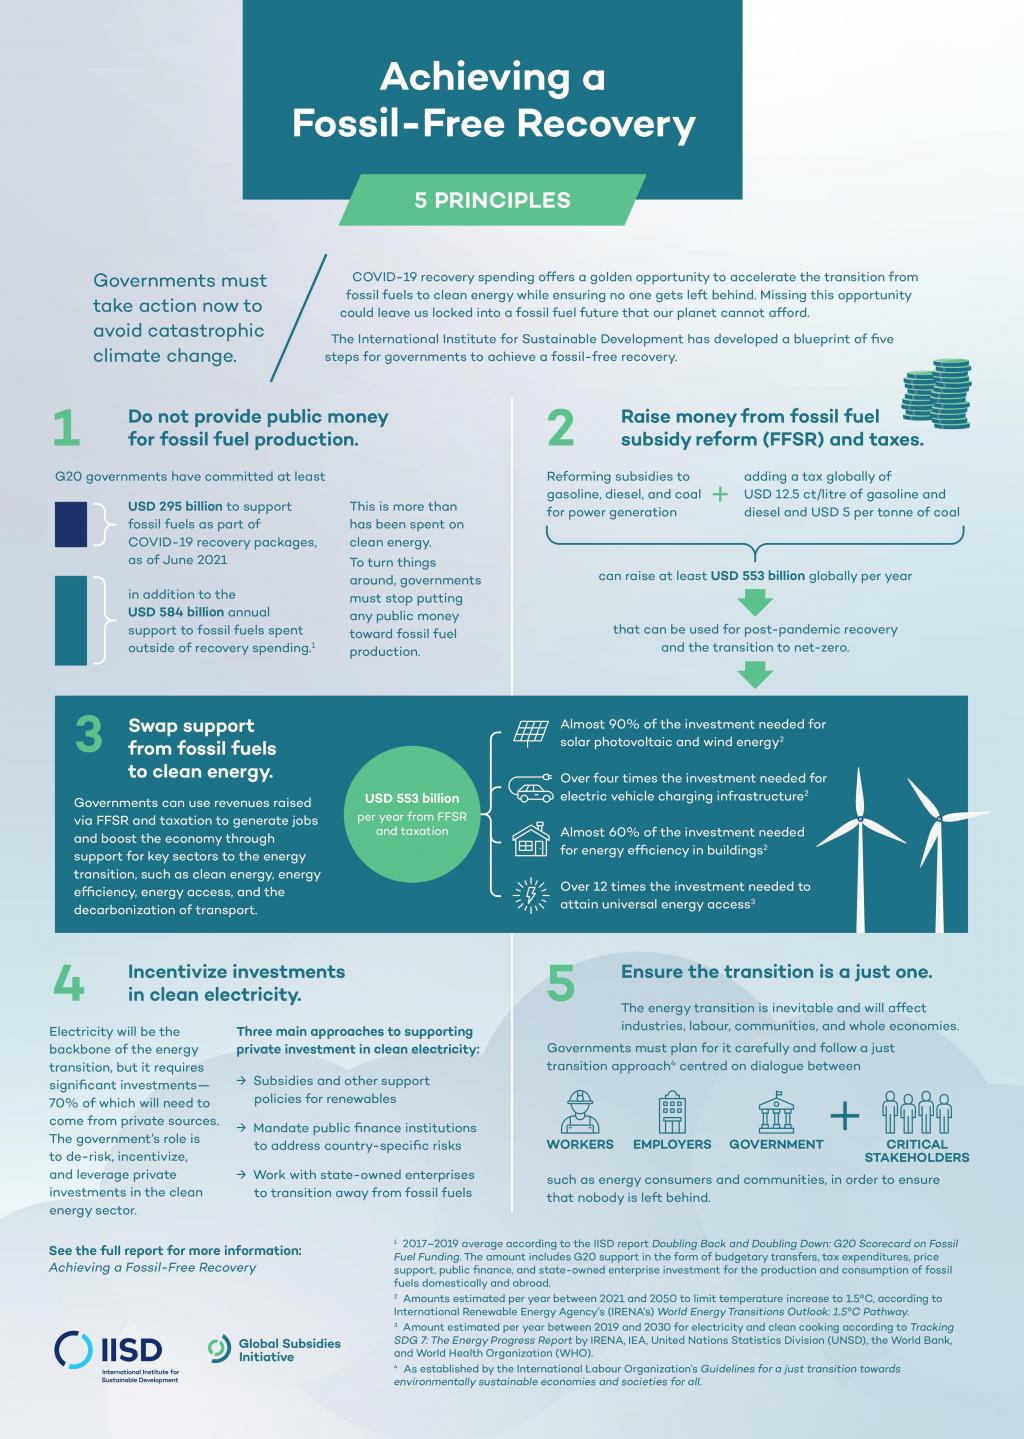 Infographic on fossil-free recovery and the road to net zero by 2050